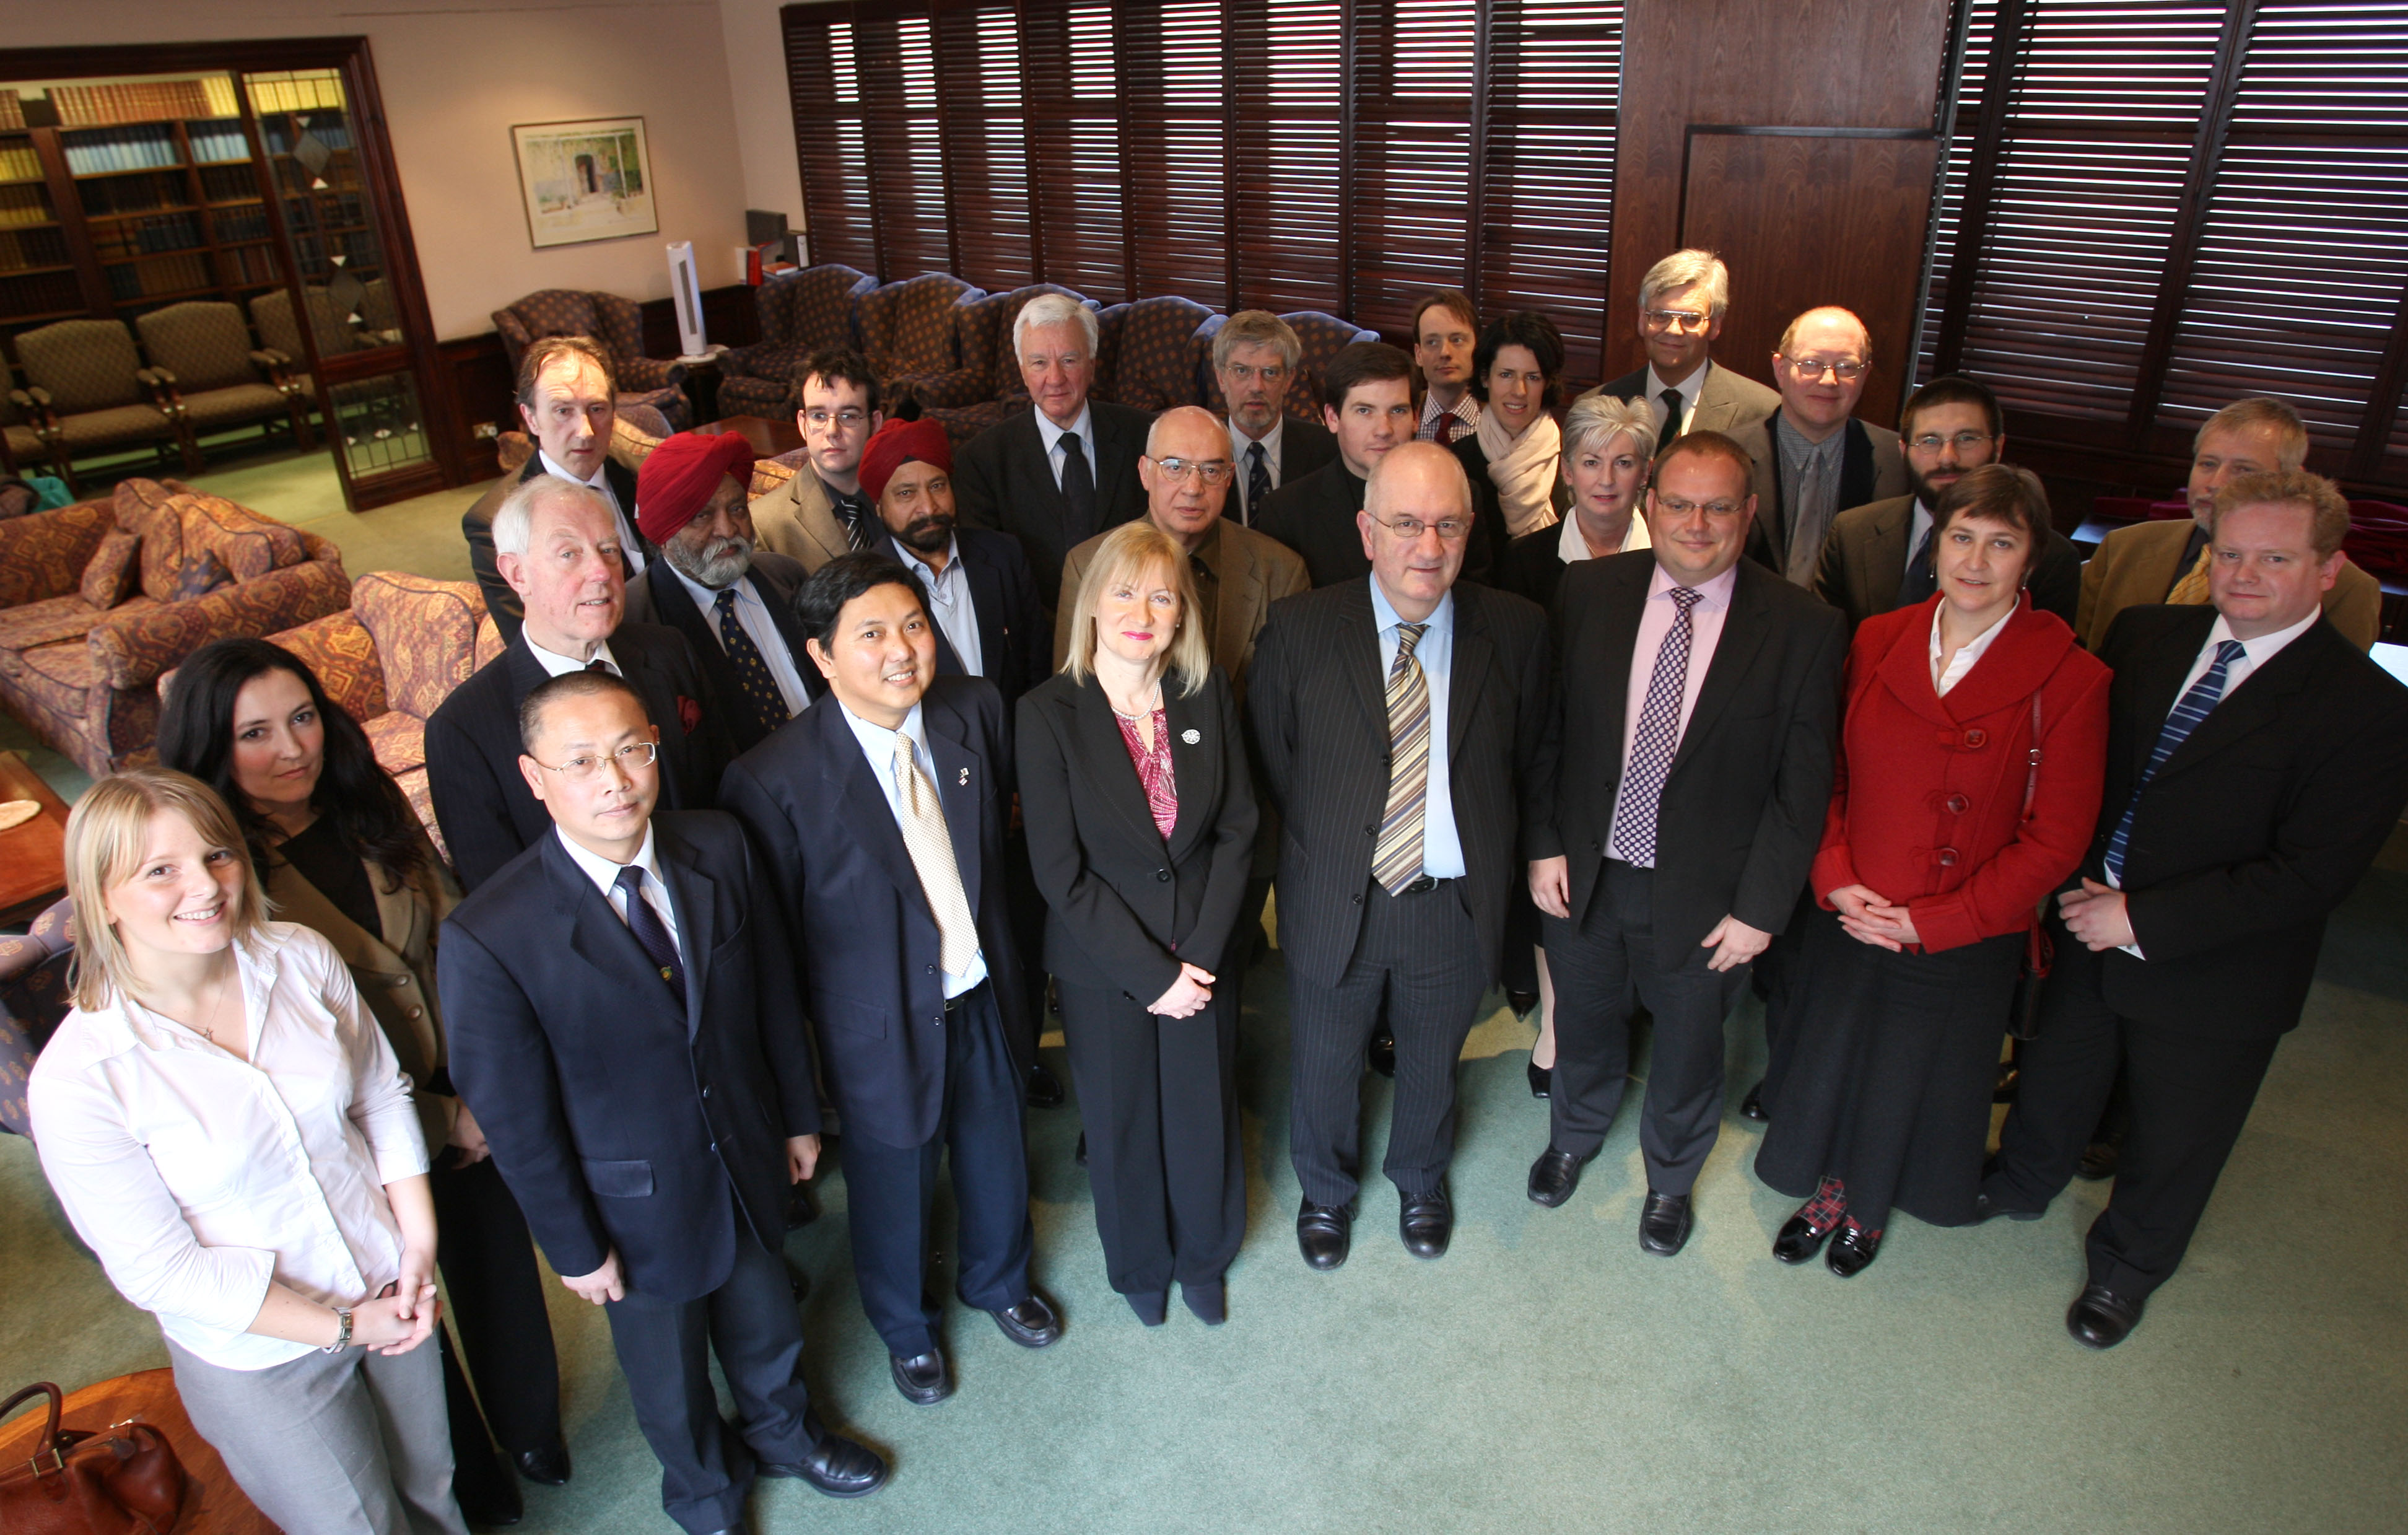 Members of the Interfaith Legal Advisers Network